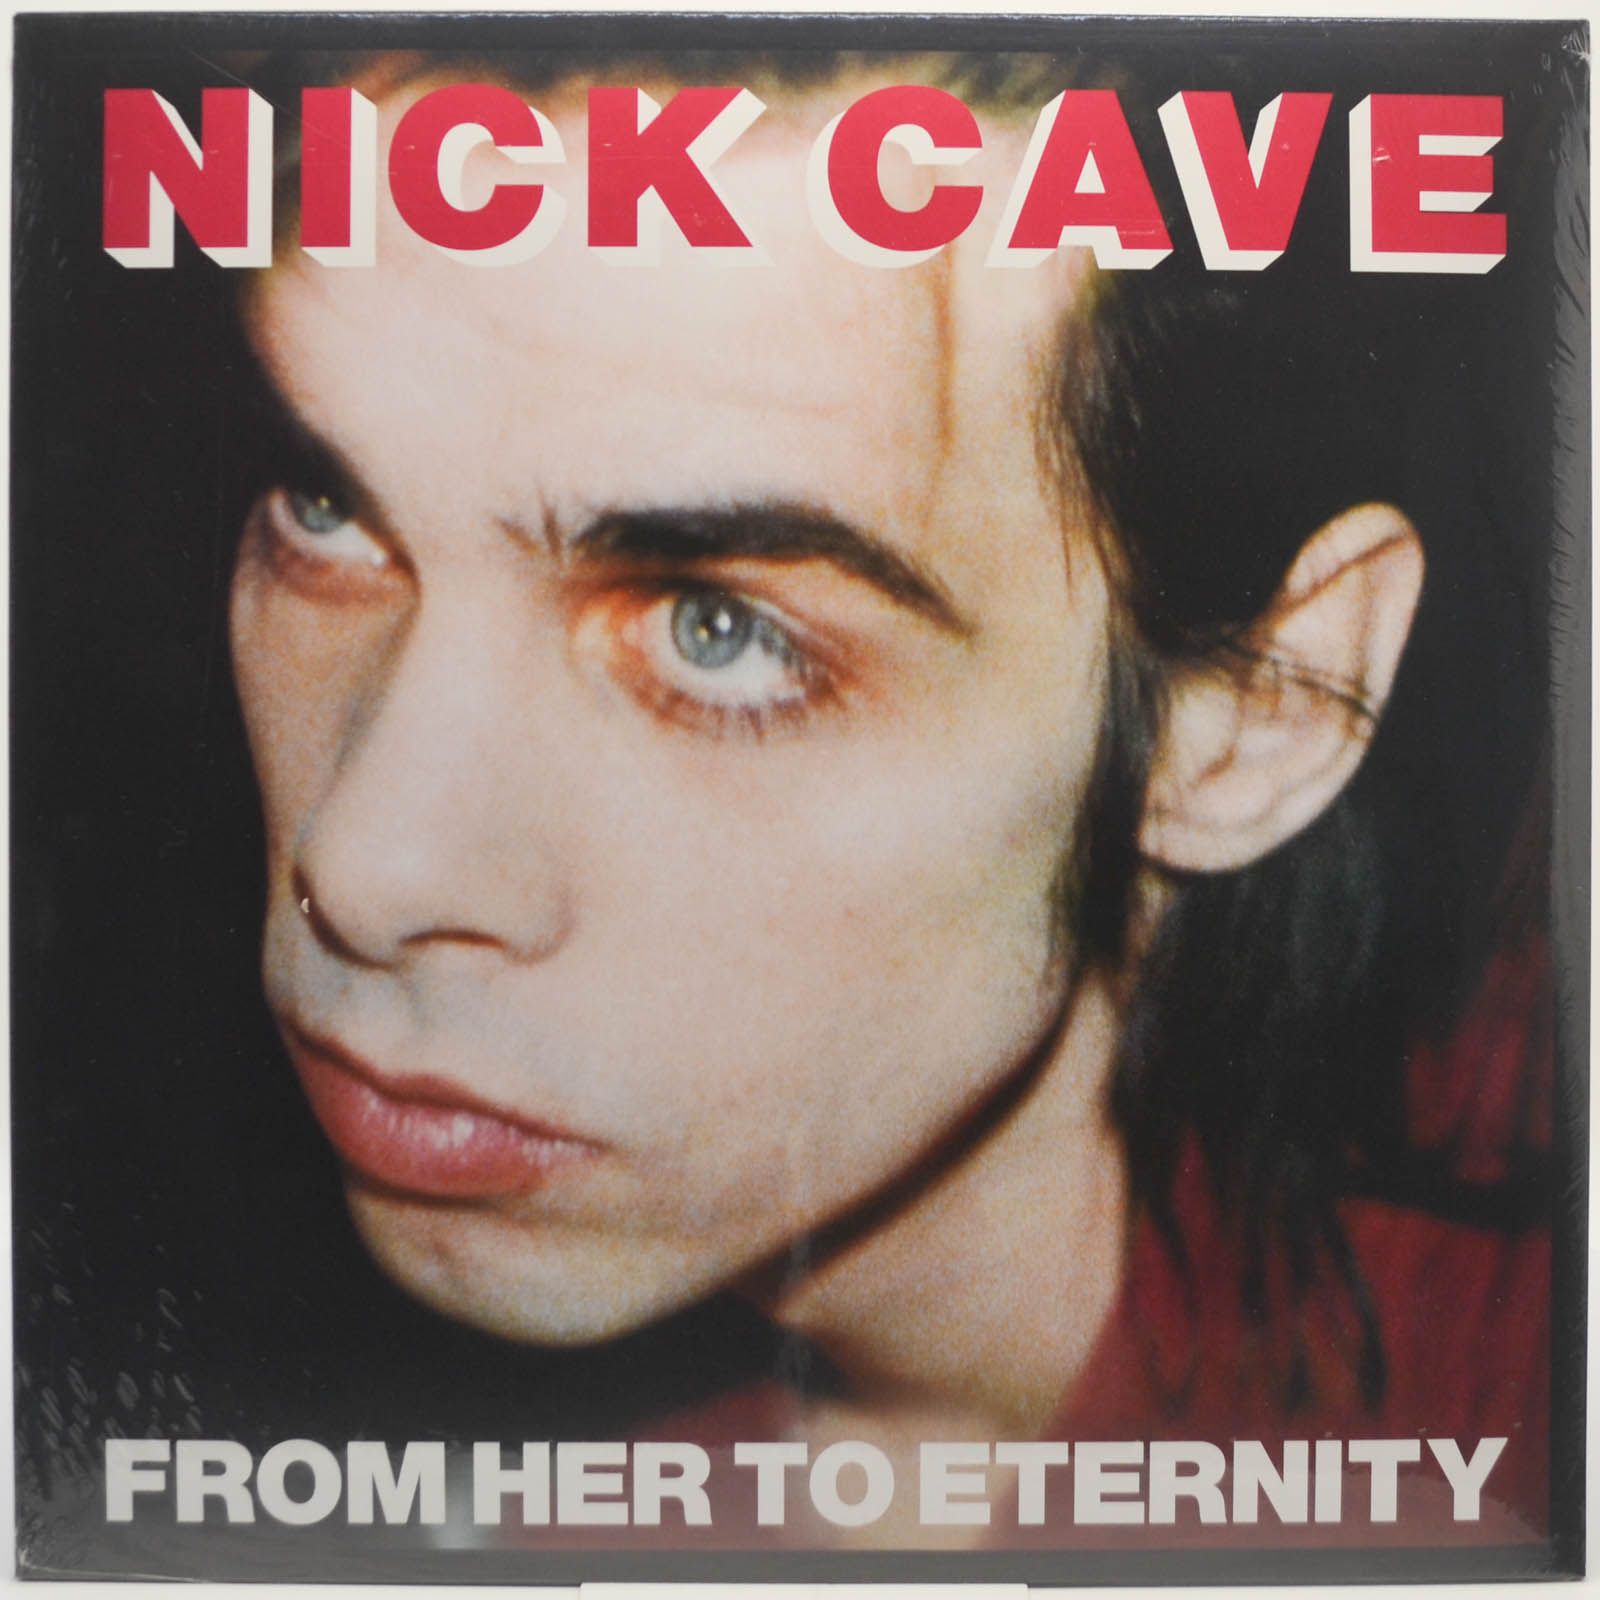 Nick Cave Featuring The Bad Seeds — From Her To Eternity, 1984